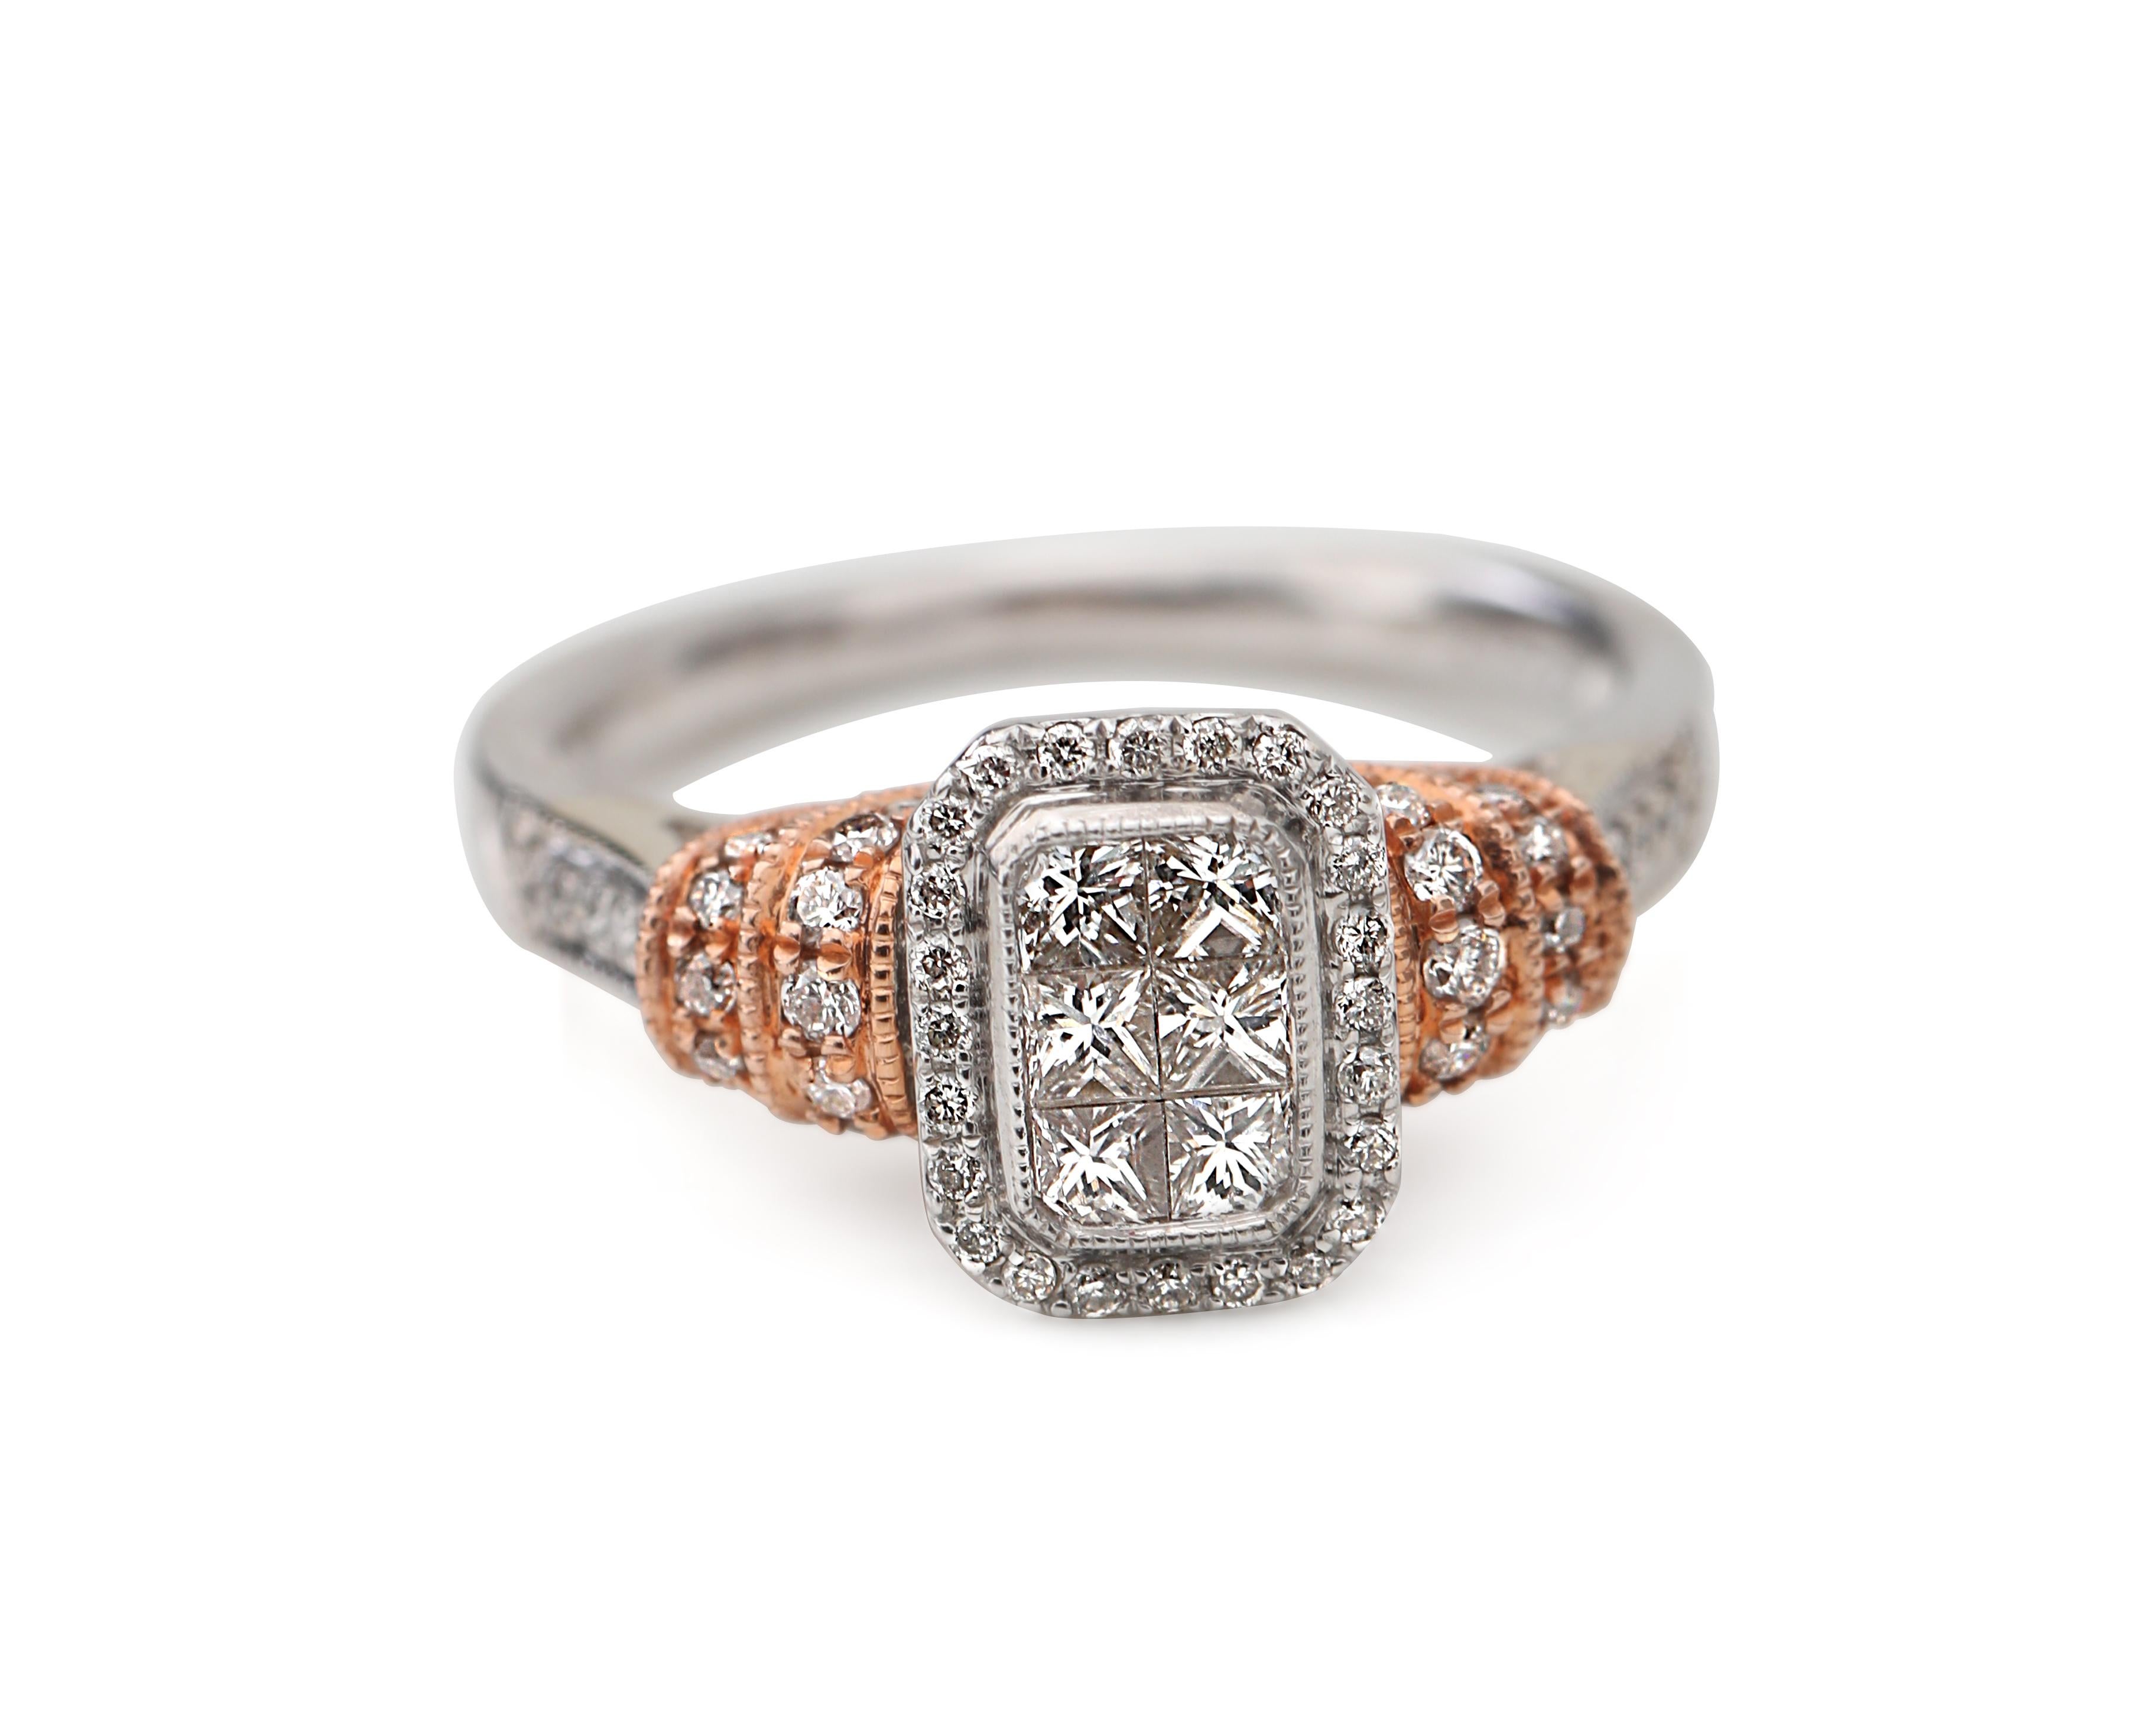 Beautifully crafted two-tone rose gold and white gold engagement ring. This ring features one carat of diamonds in total. The center appears to be a large stone, but in fact, is made up of 6 equal cut princess cut diamonds. It appears to look like a